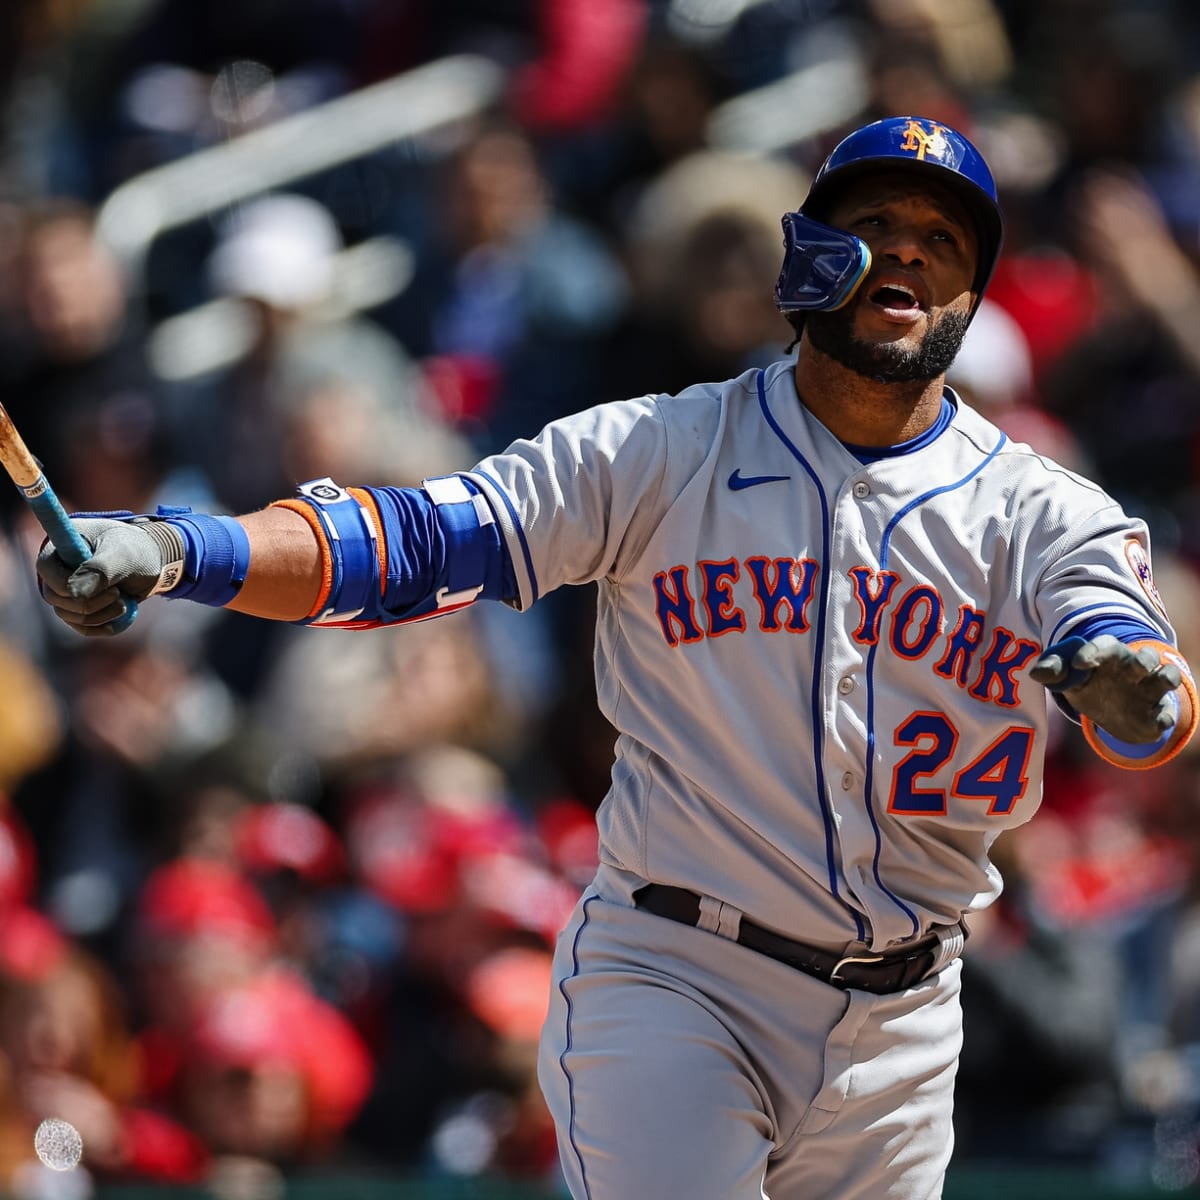 Reports: Padres Close to Signing Former Mets Second Baseman